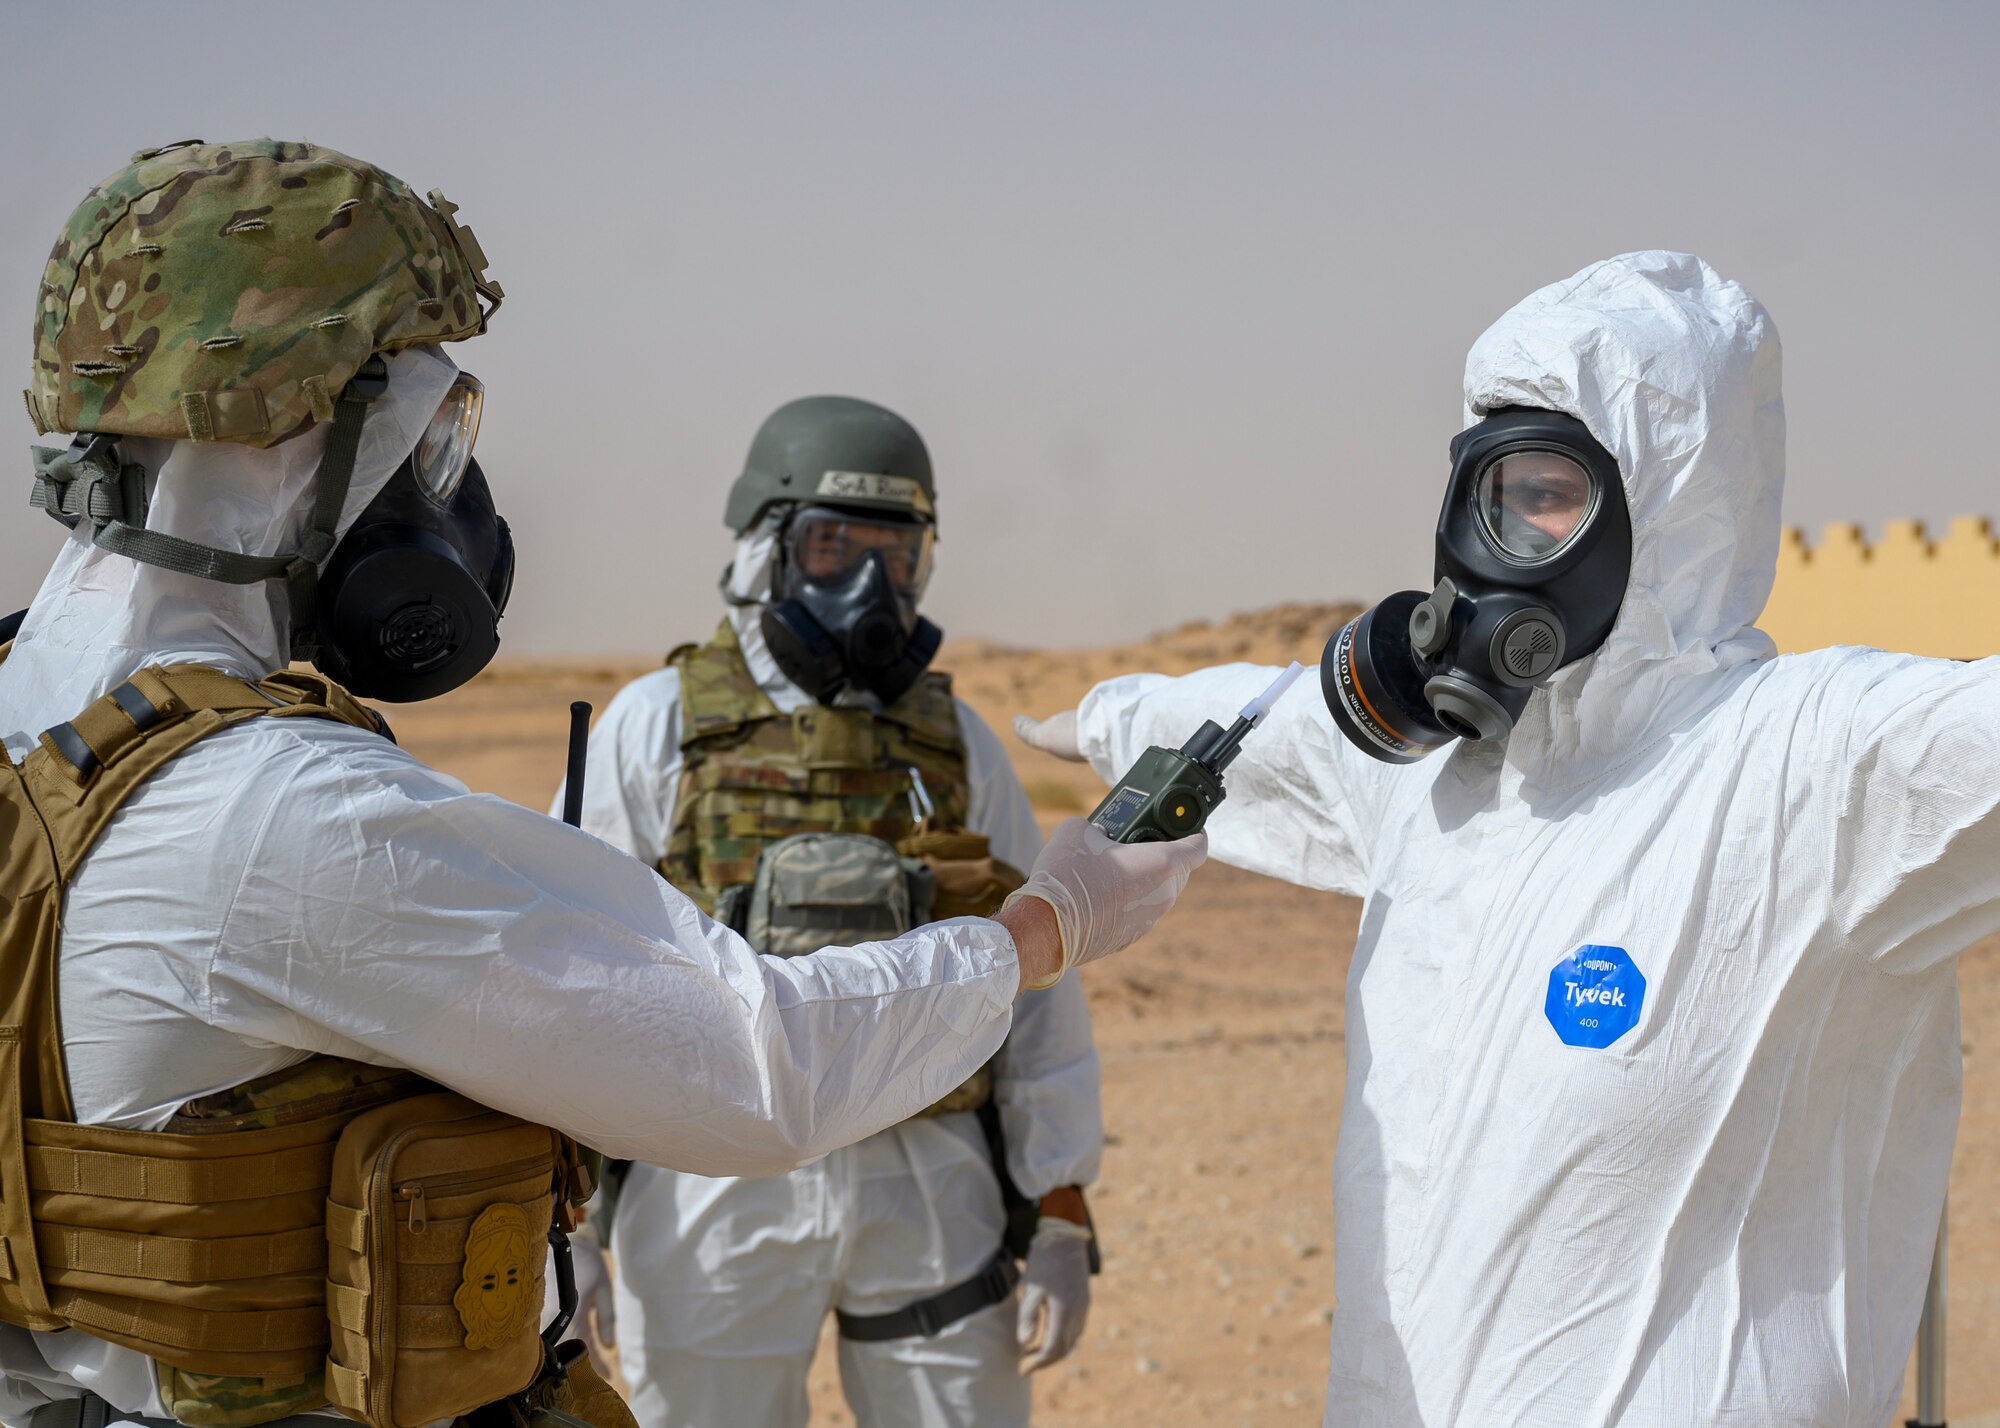 Members of the 378th Civil Engineer Squadron emergency management flight simulate checking for any contamination readings on members of the Royal Saudi Air Force after a chemical, biological, radiological and nuclear response exercise, Prince Sultan Air Base, Kingdom of Saudi Arabia, May 26, 2021. The combined exercise demonstrates the emergency management integration between USAF and RSAF CBRN response units while also familiarizing each unit with the other’s techniques and procedures. (U.S. Air Force photo by Senior Airman Samuel Earick)